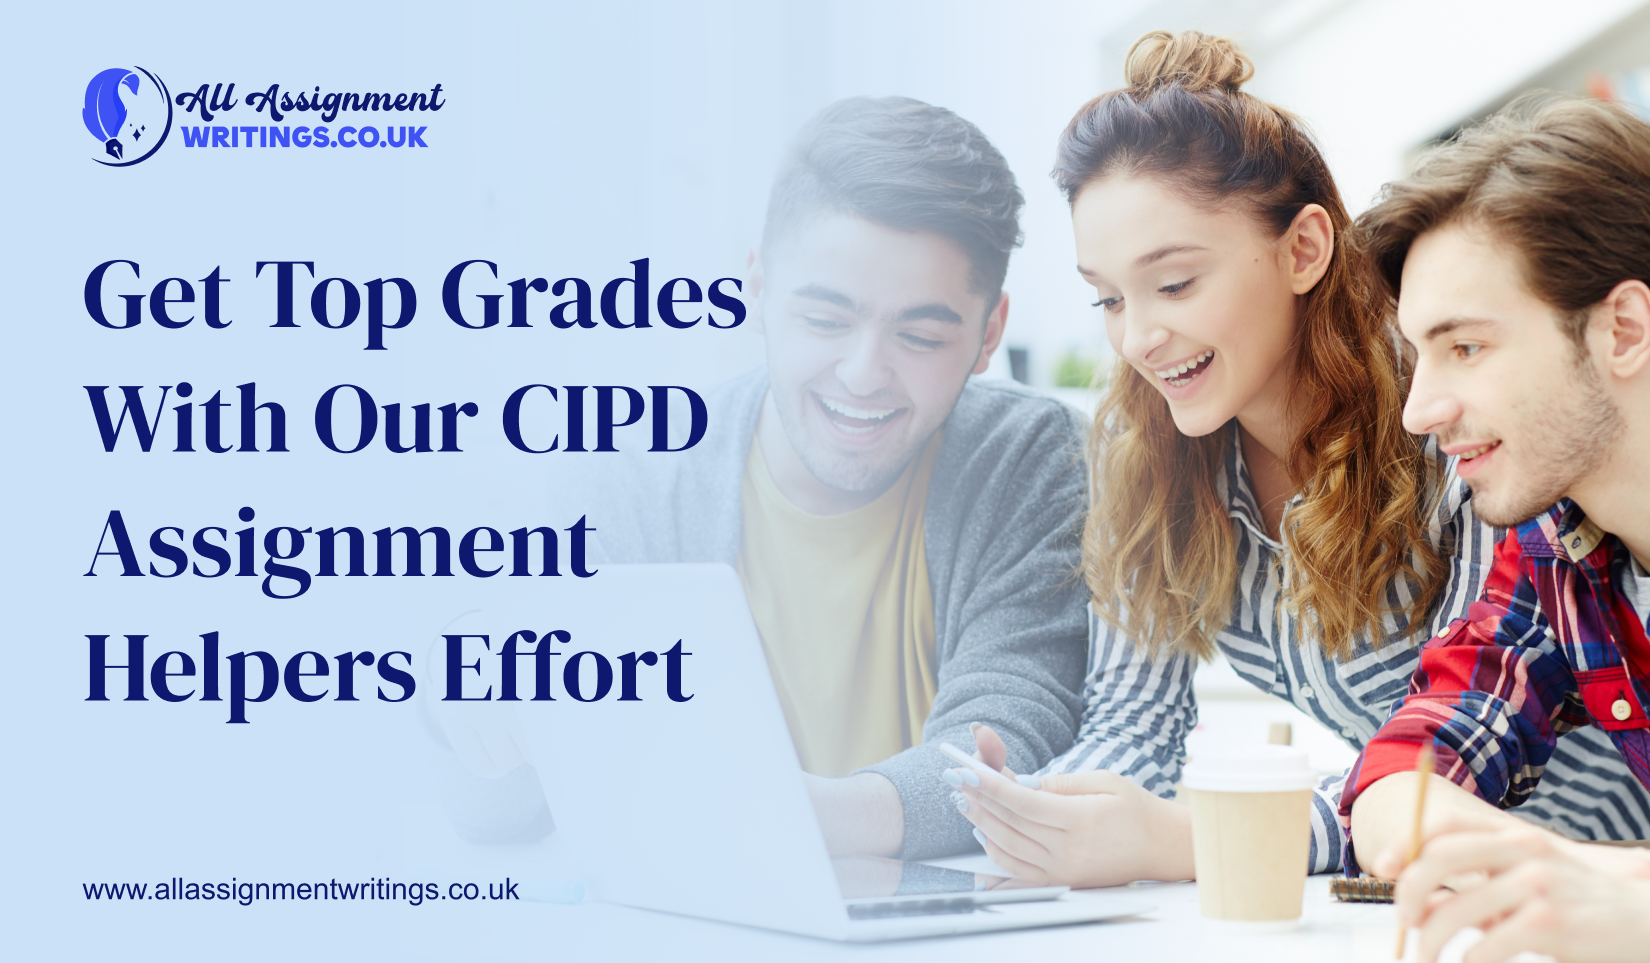 Get Top Grades With Our CIPD Assignment Helpers Effort